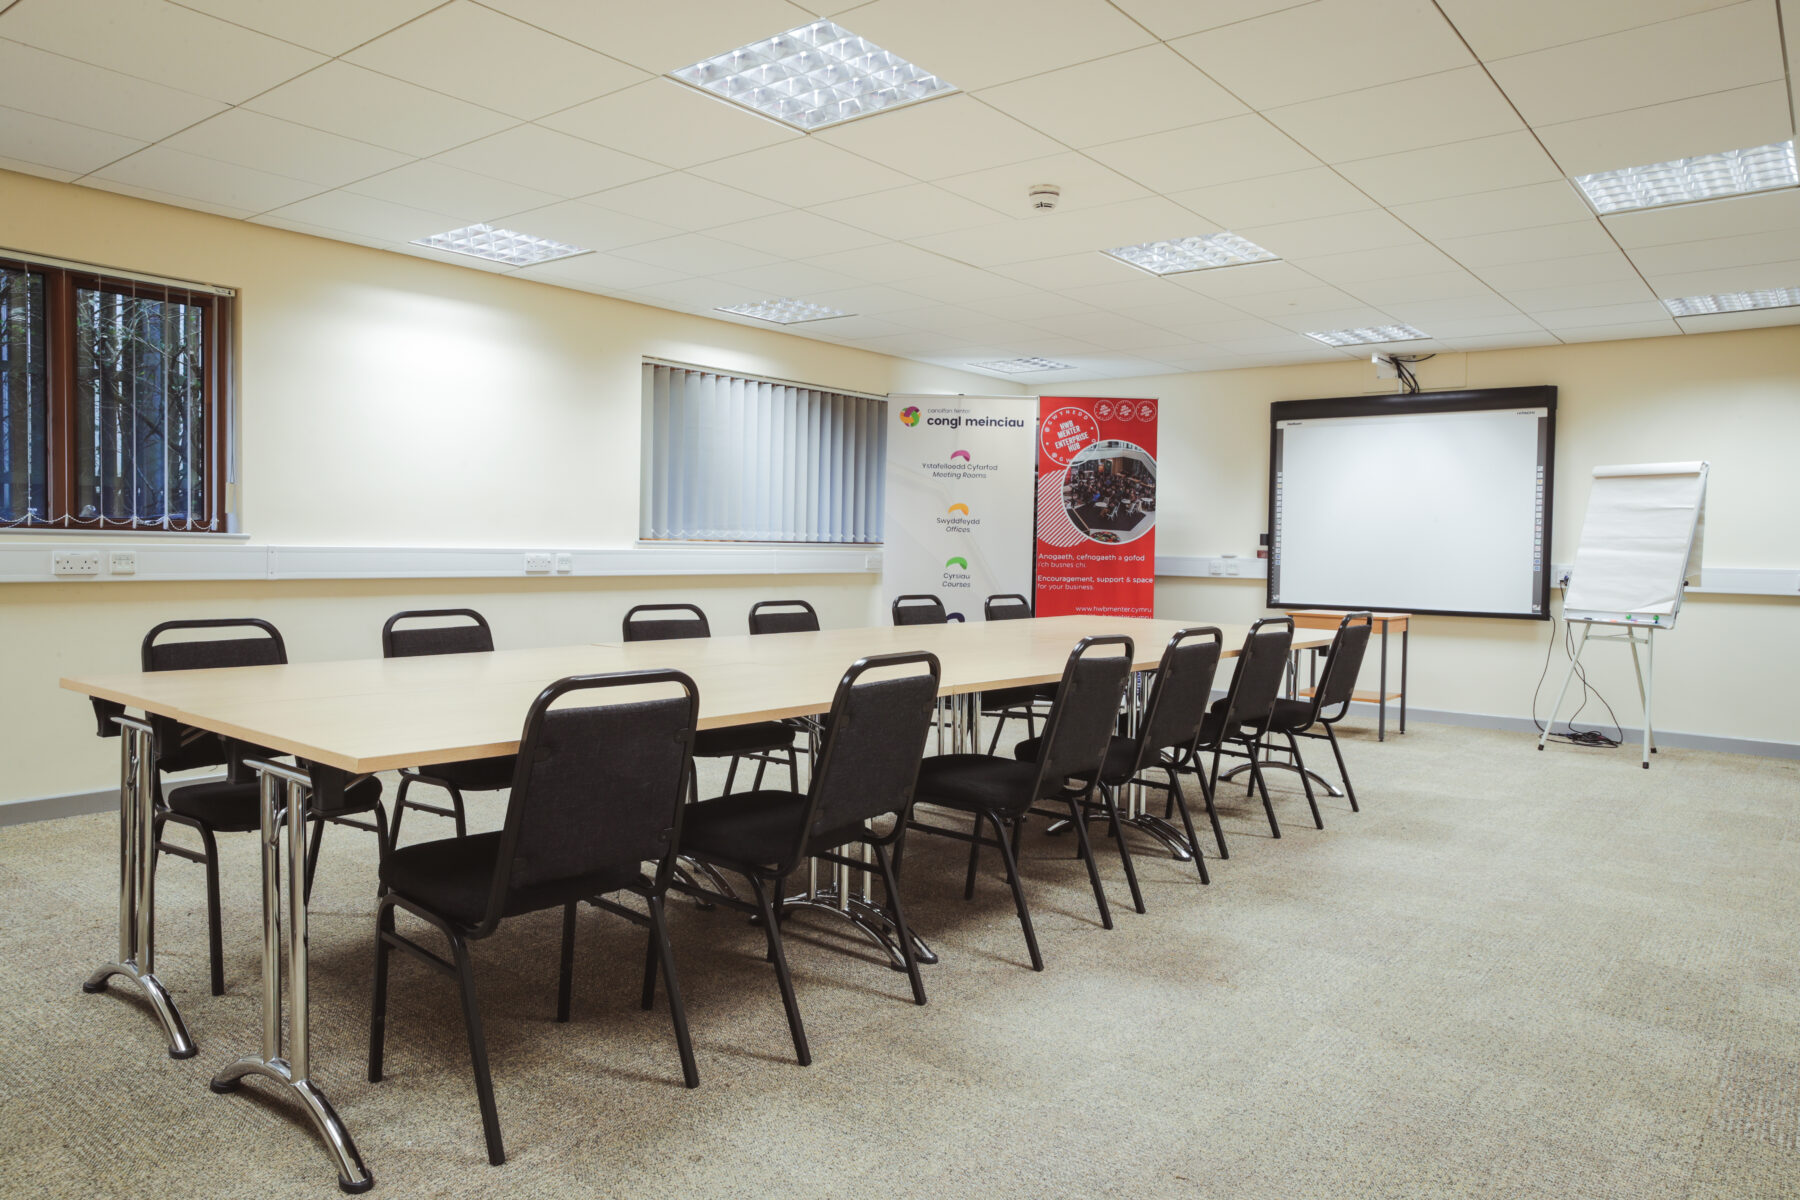 Meeting room with long table in Congl Meinciau